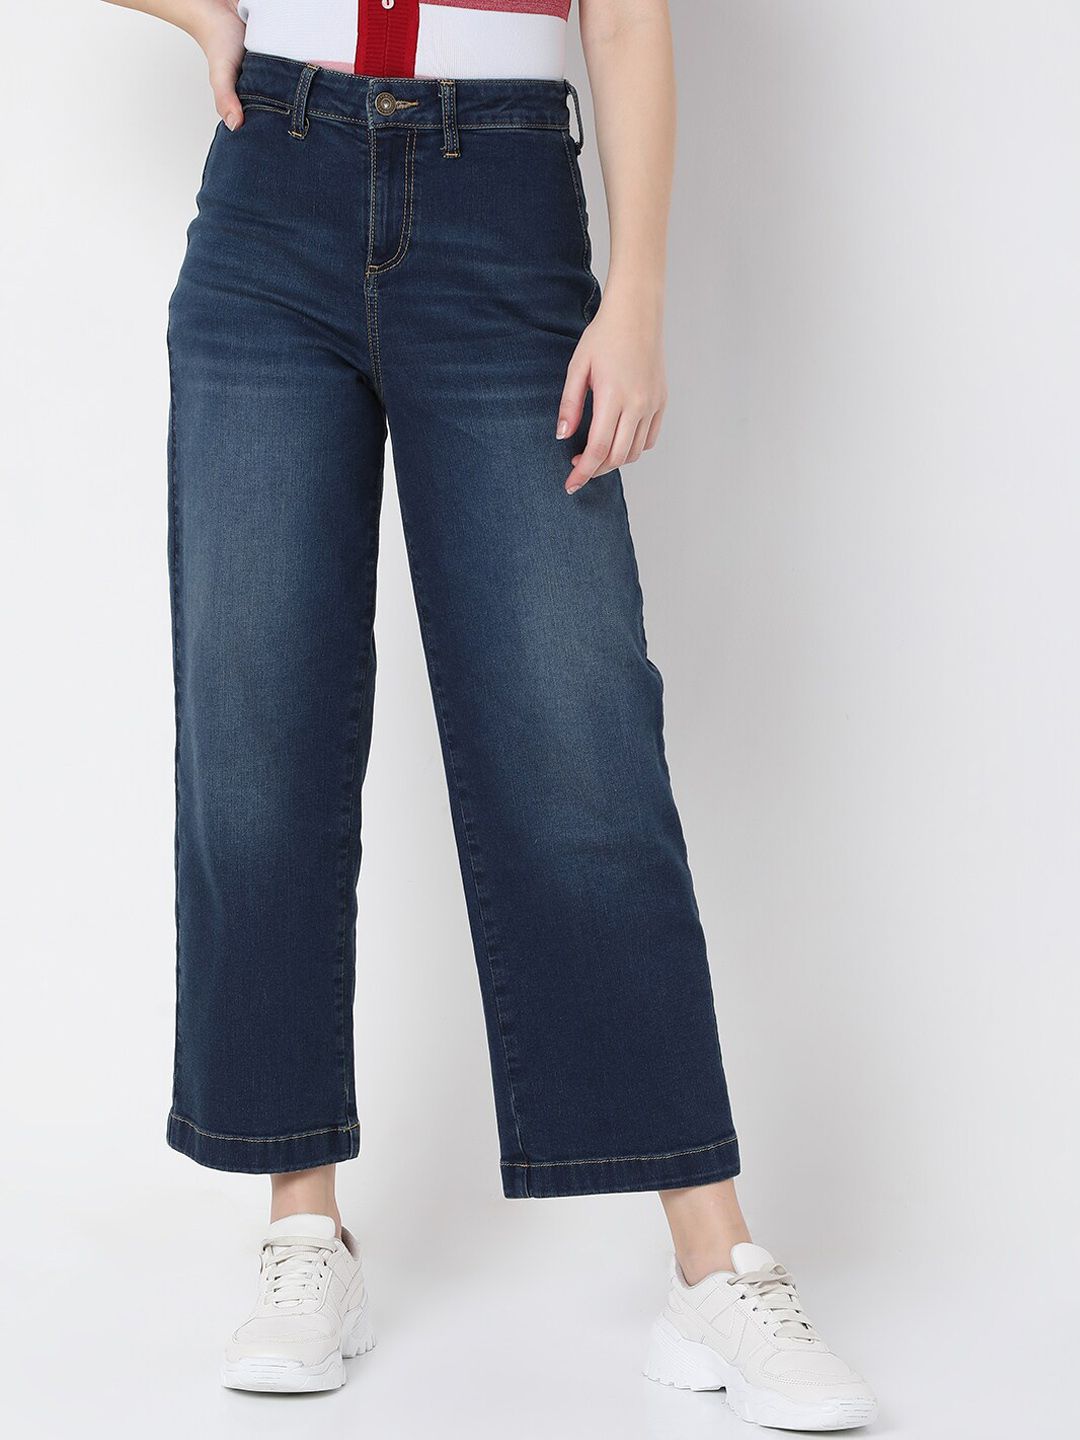 Vero Moda Women Blue Wide Leg High-Rise Stretchable Jeans Price in India